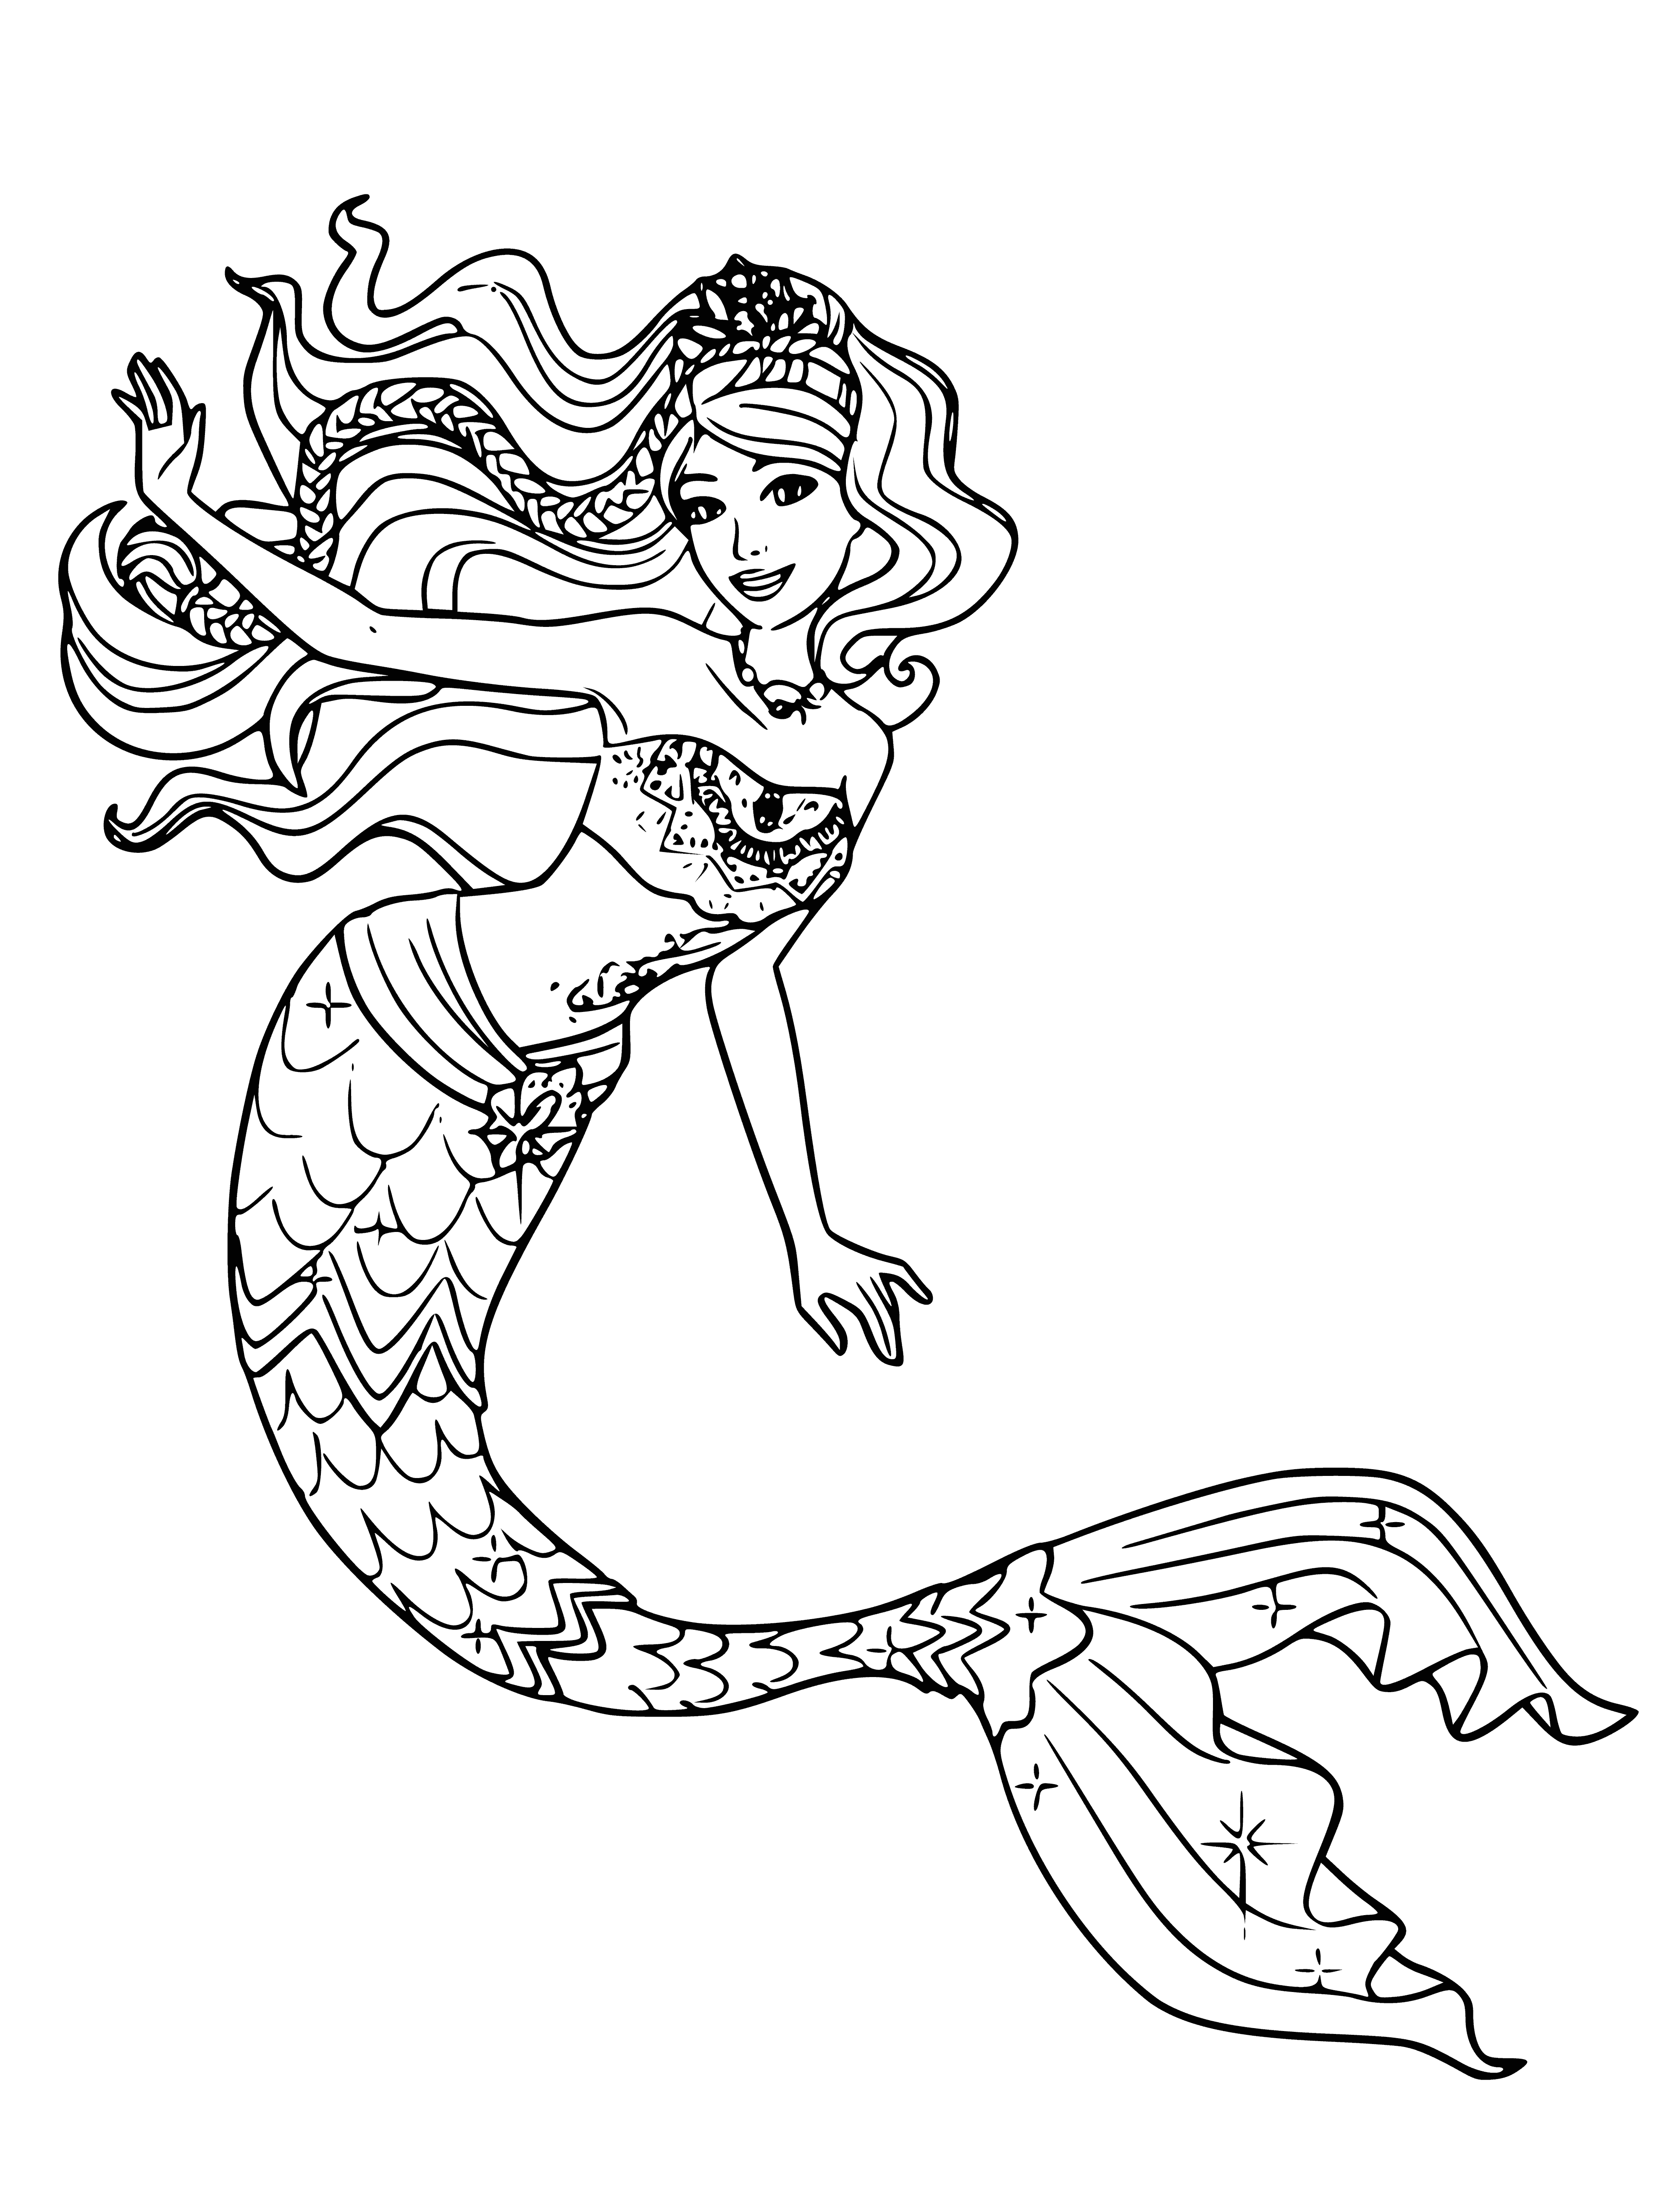 coloring page: A group of mermaids gather around their queen, wearing fins, shells, and a crown.